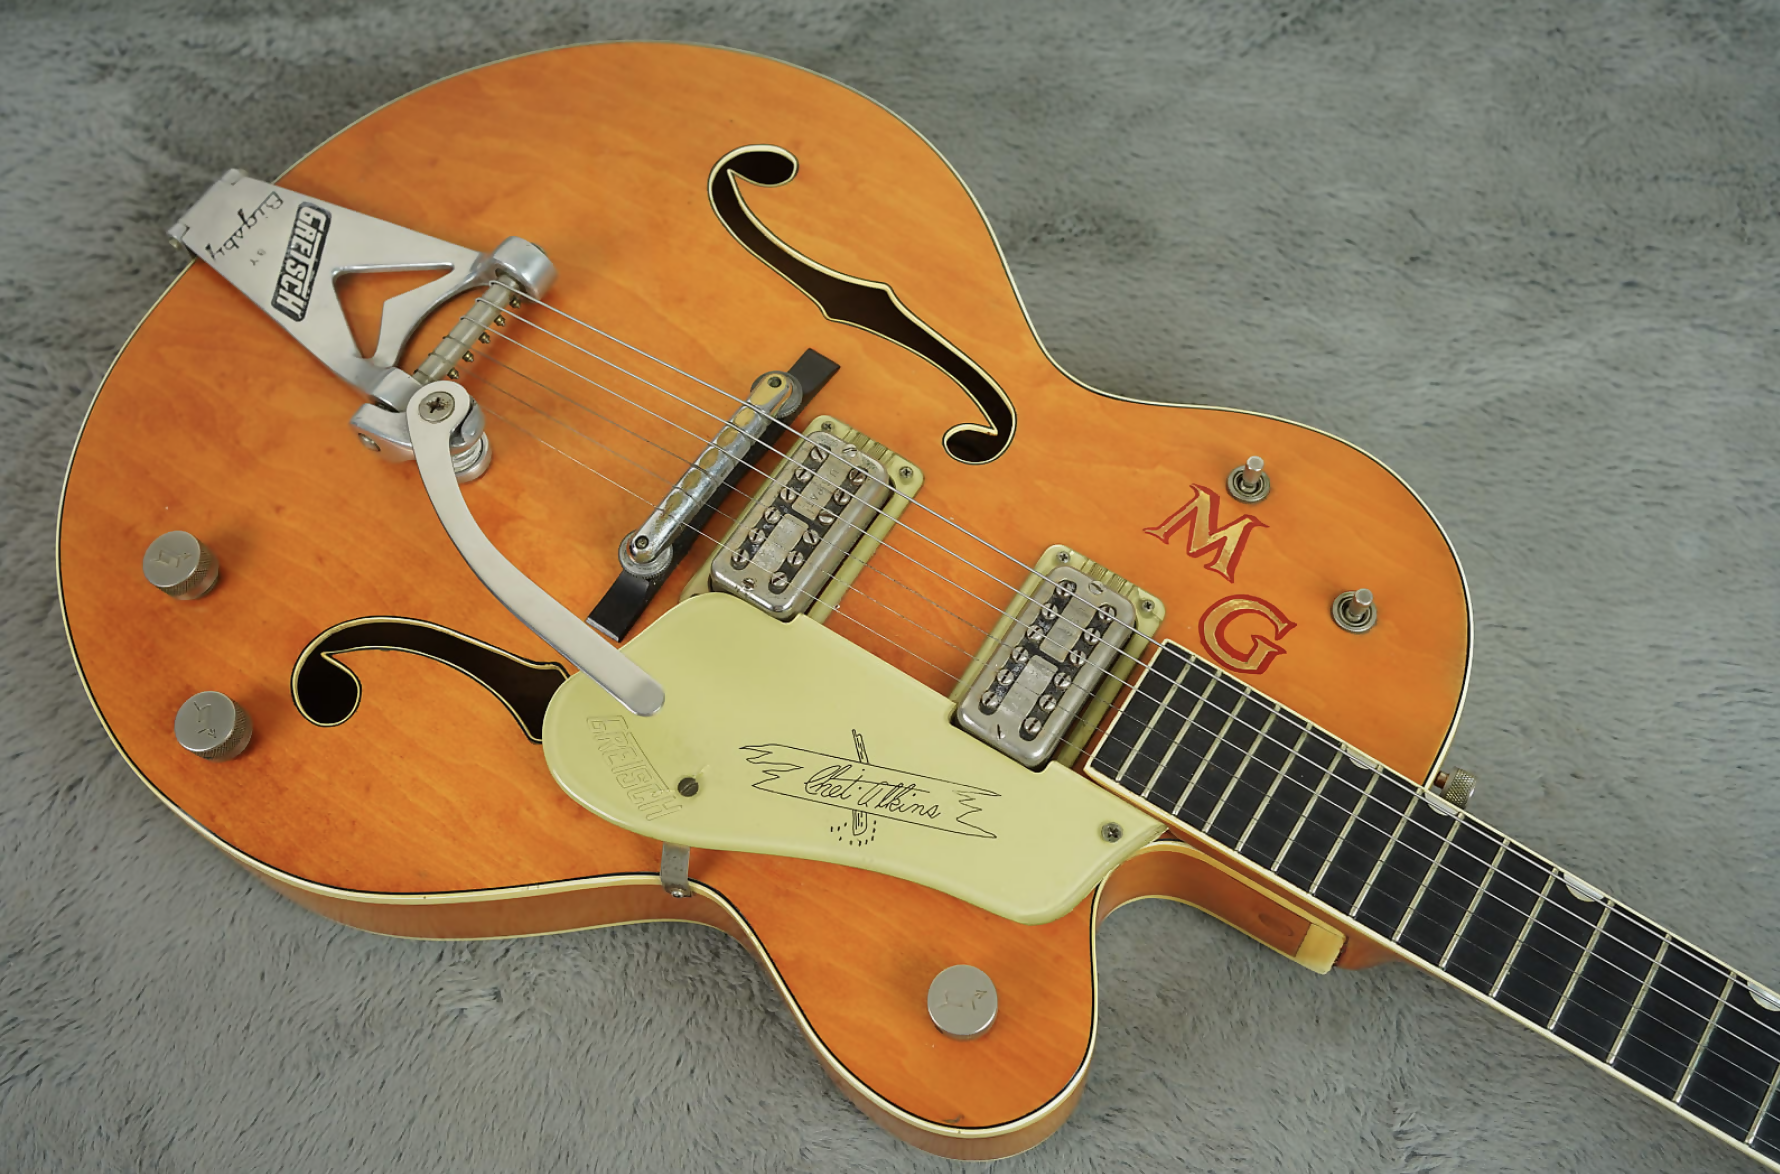 1961 Gretsch Chet Atkins 6120 Single Cut + OHSC + tag One Owner!